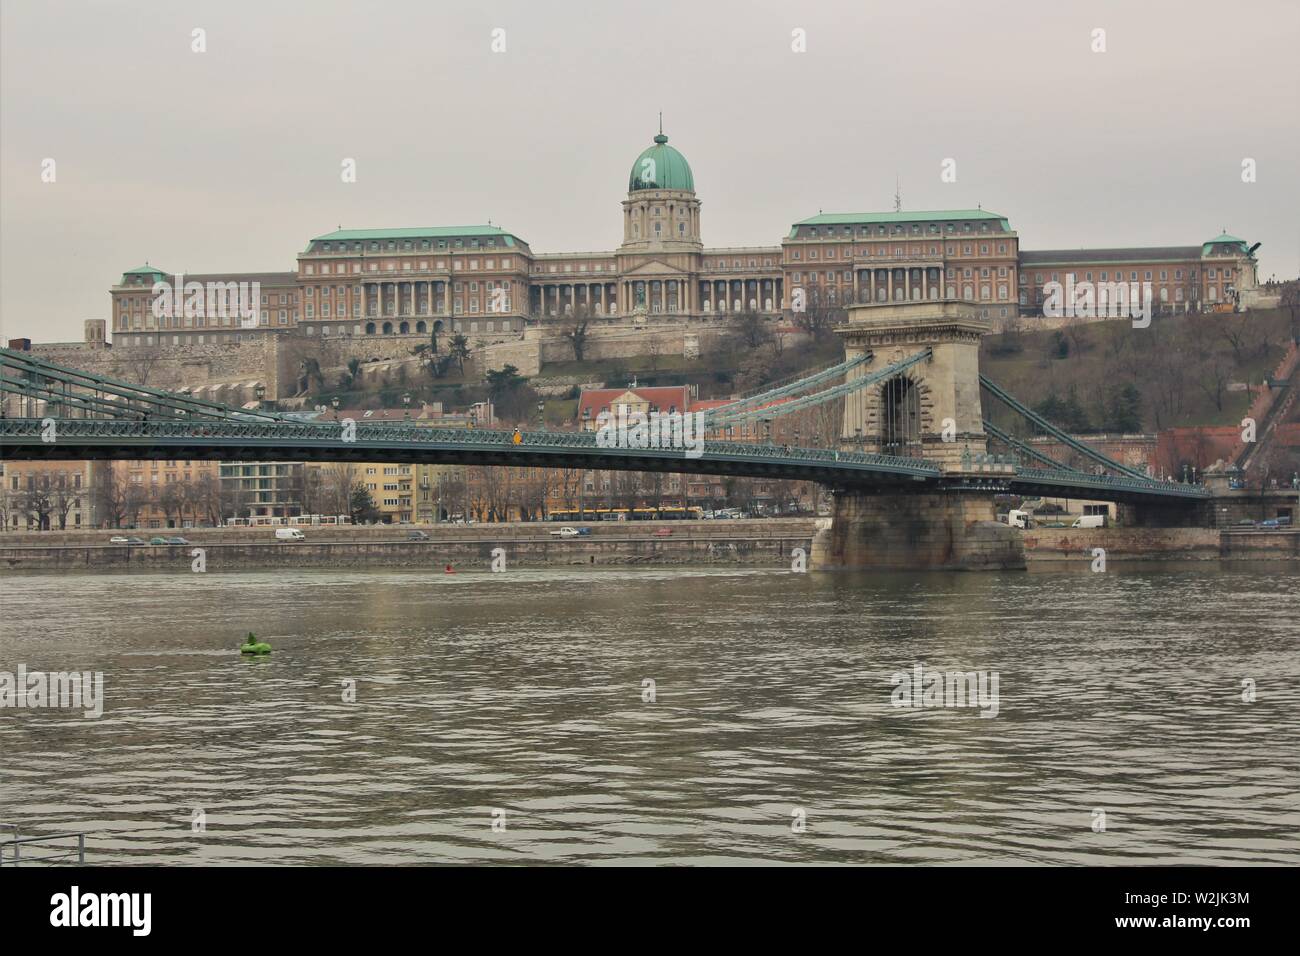 A view of the Széchenyi Lanczhid chain bridge and the Royal Palace of Buda Castle, taken from the Pest side of the river Danube. Stock Photo